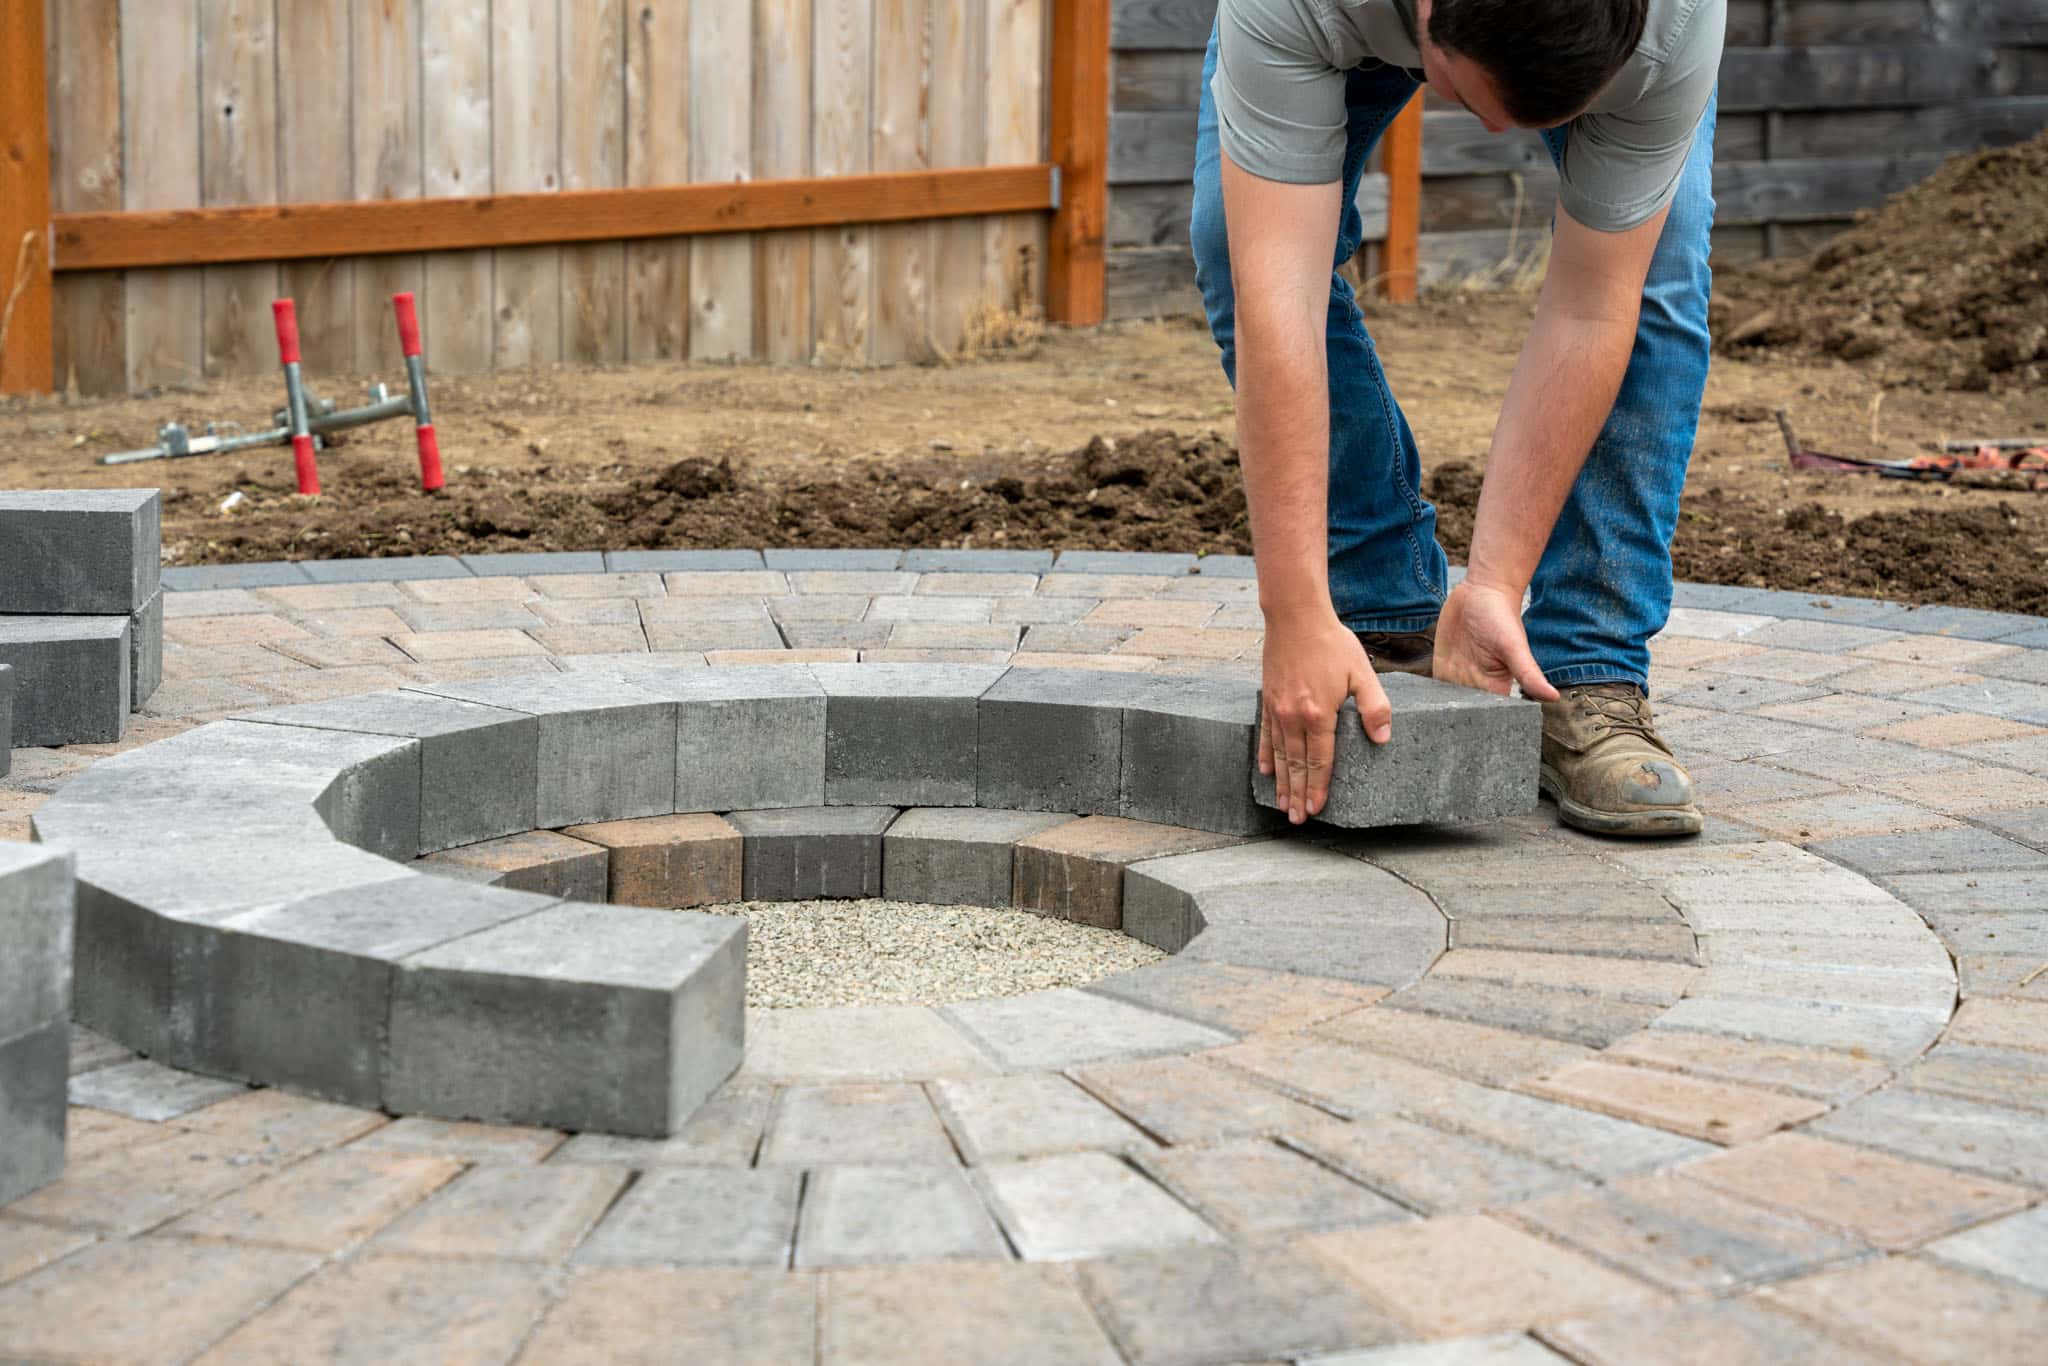 How To Build A Circle Paver Patio & Stone Fire Pit | Western Interlock